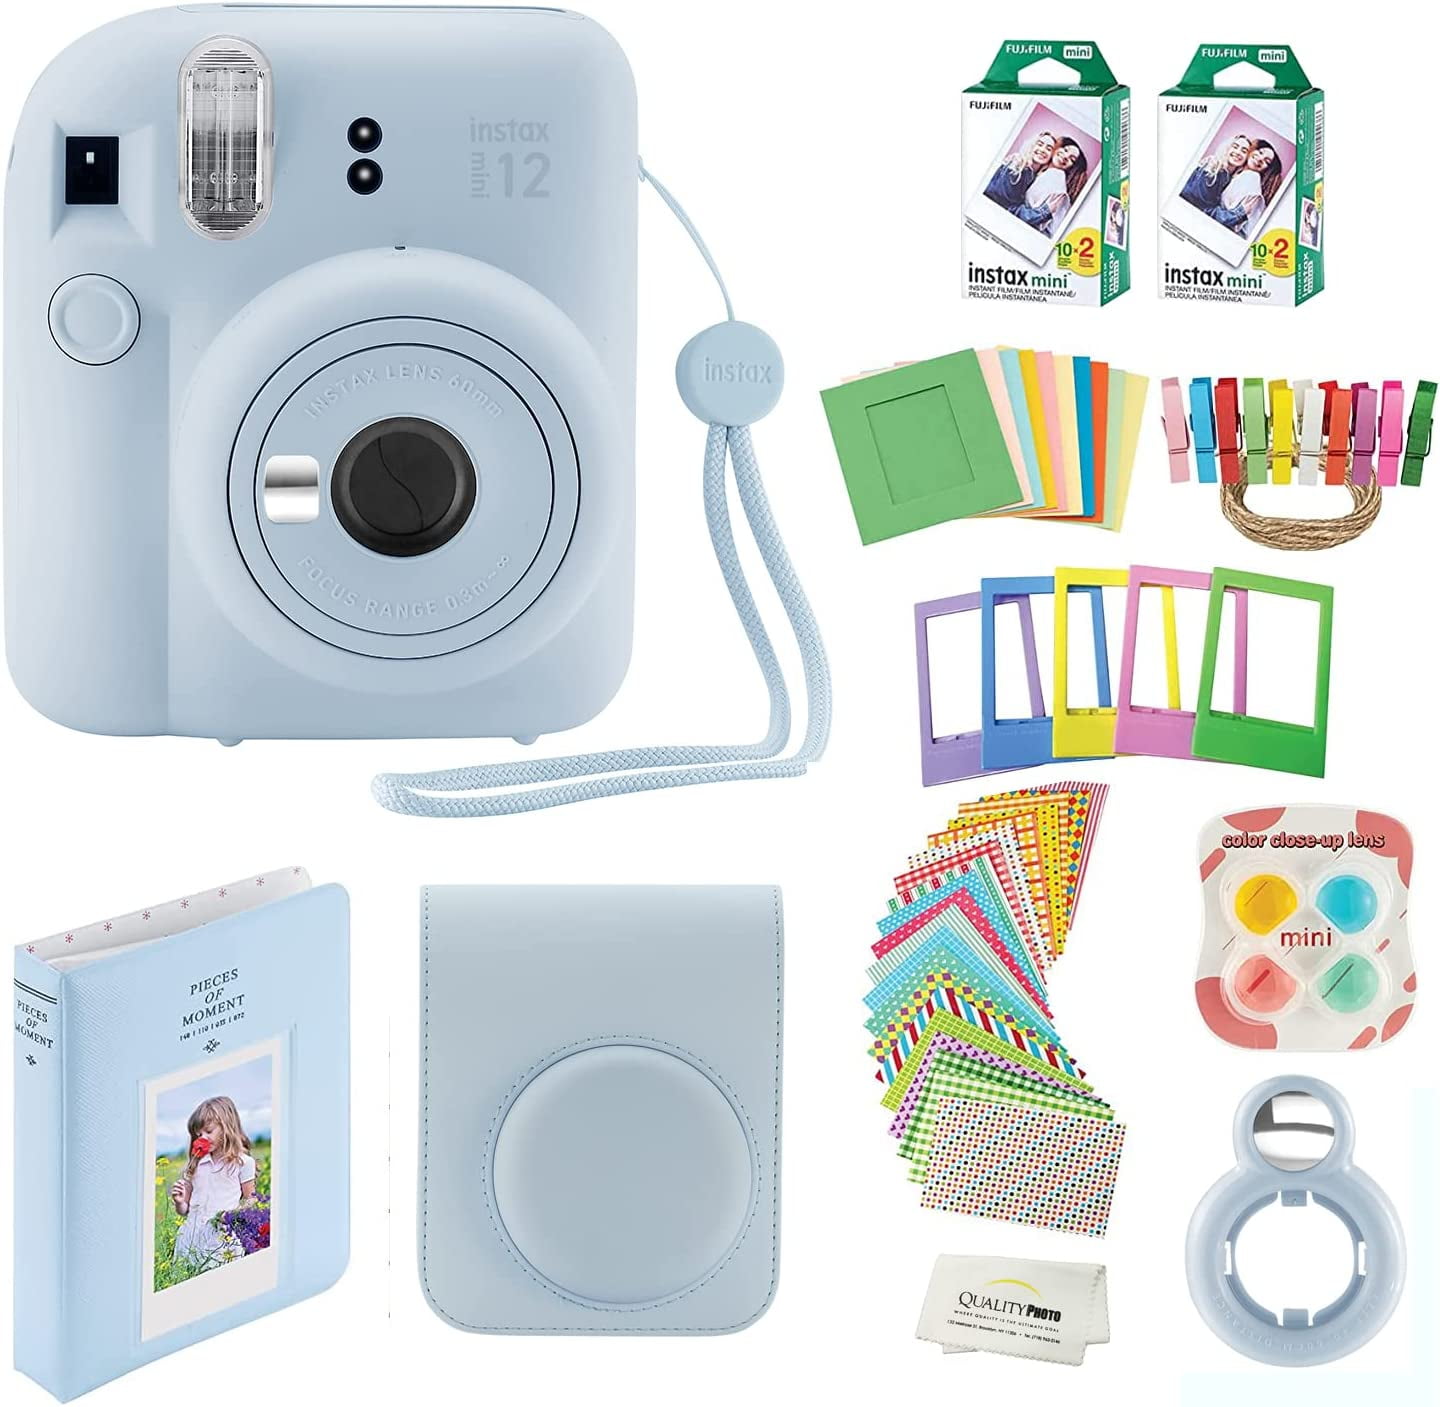 Fujifilm's Instax Mini 12 Is an Easy Way To Get Into Instant Photography